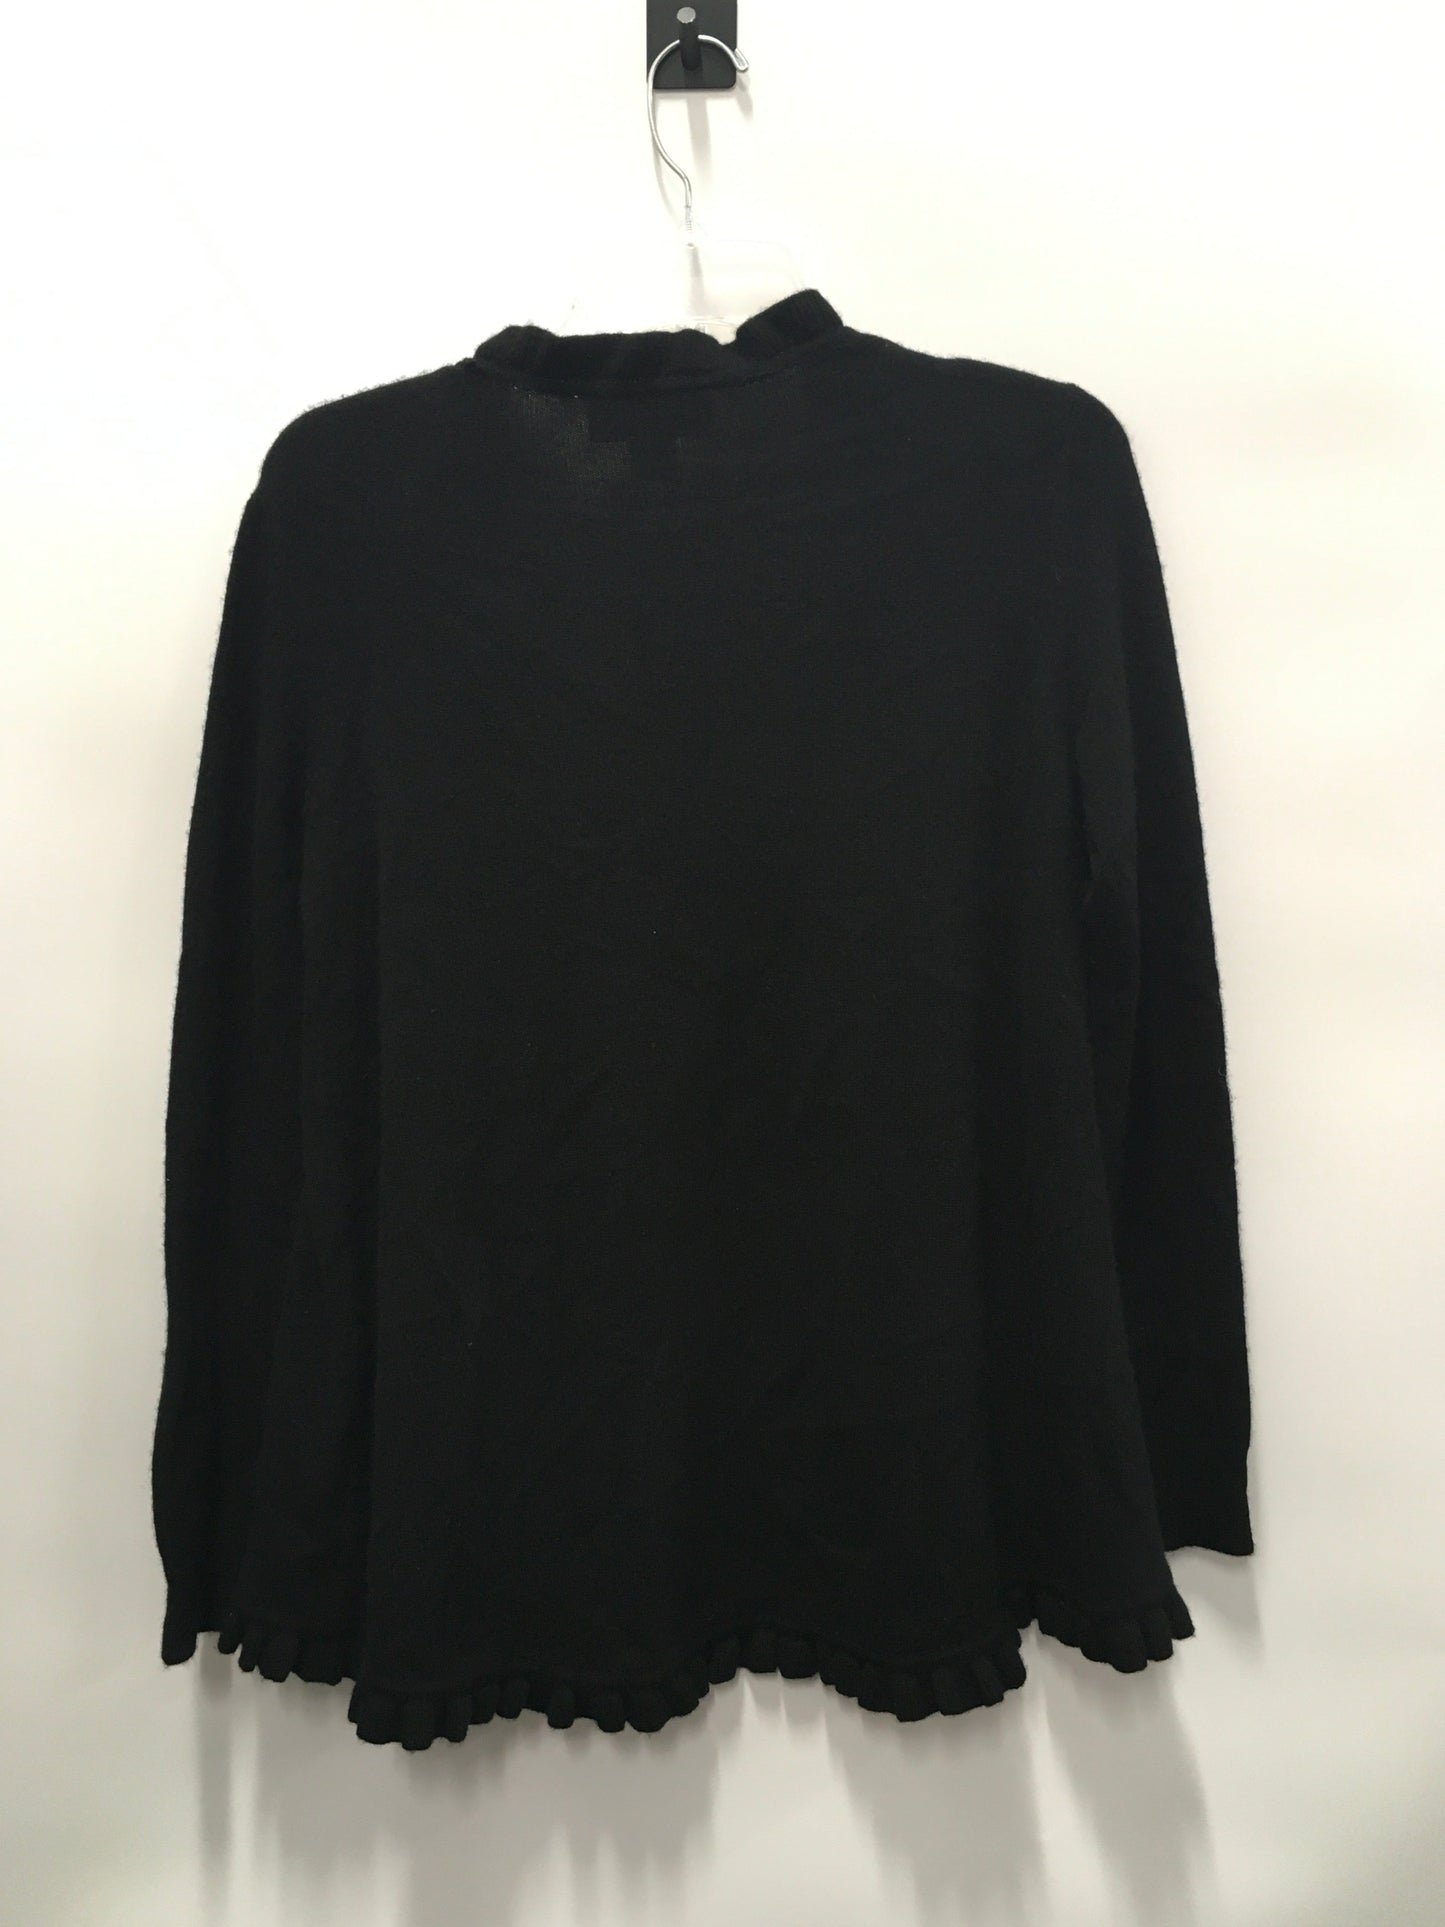 Black Sweater Cashmere Ply Cashmere, Size S